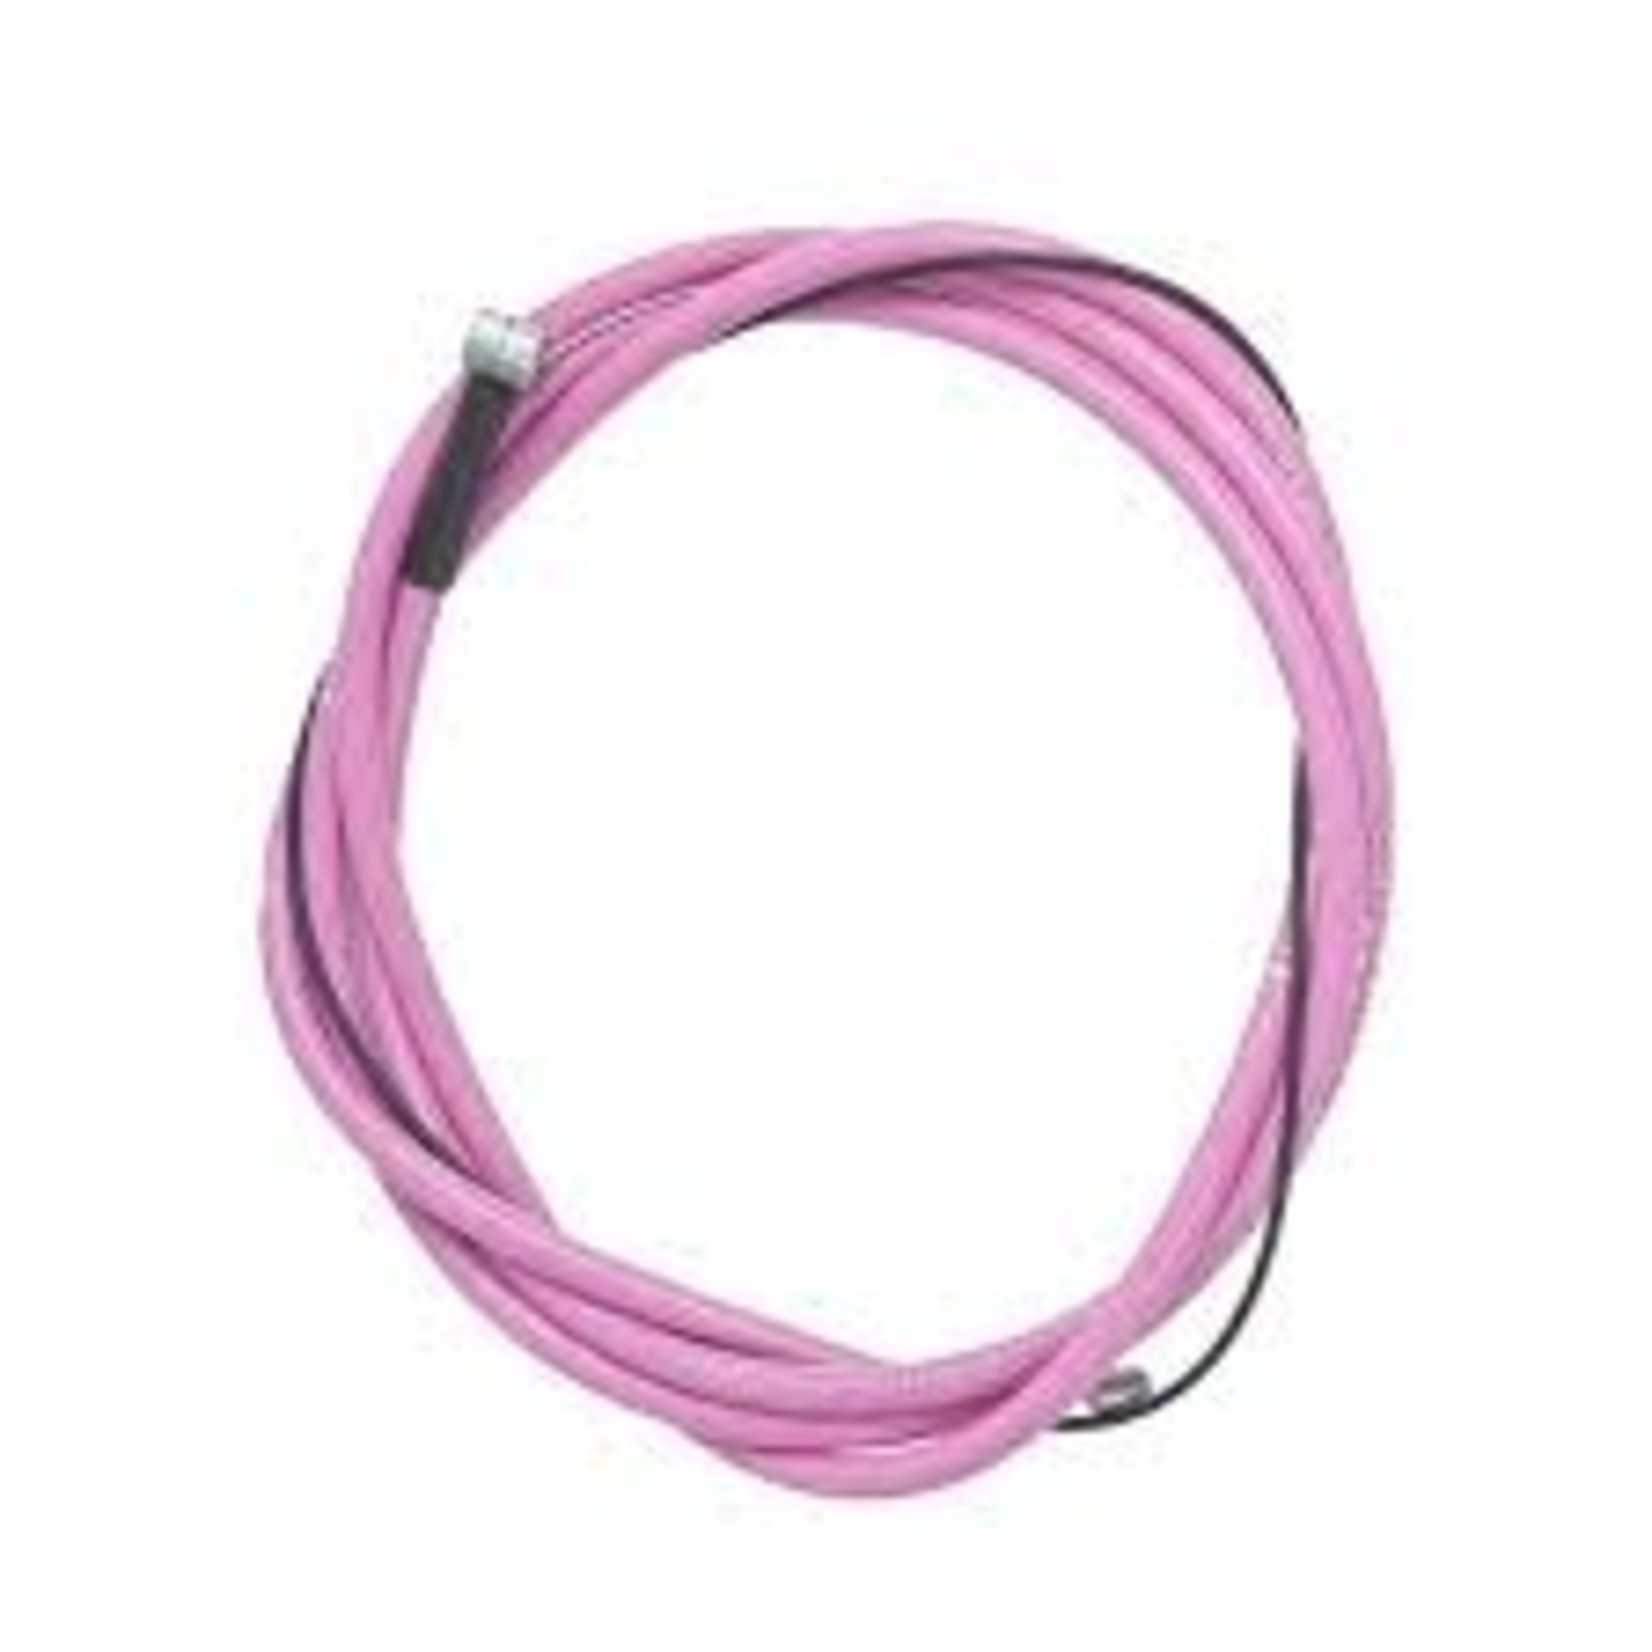 The Shadow Conspiracy Cable The Shadow Conspiracy Linear 50x58in Pink